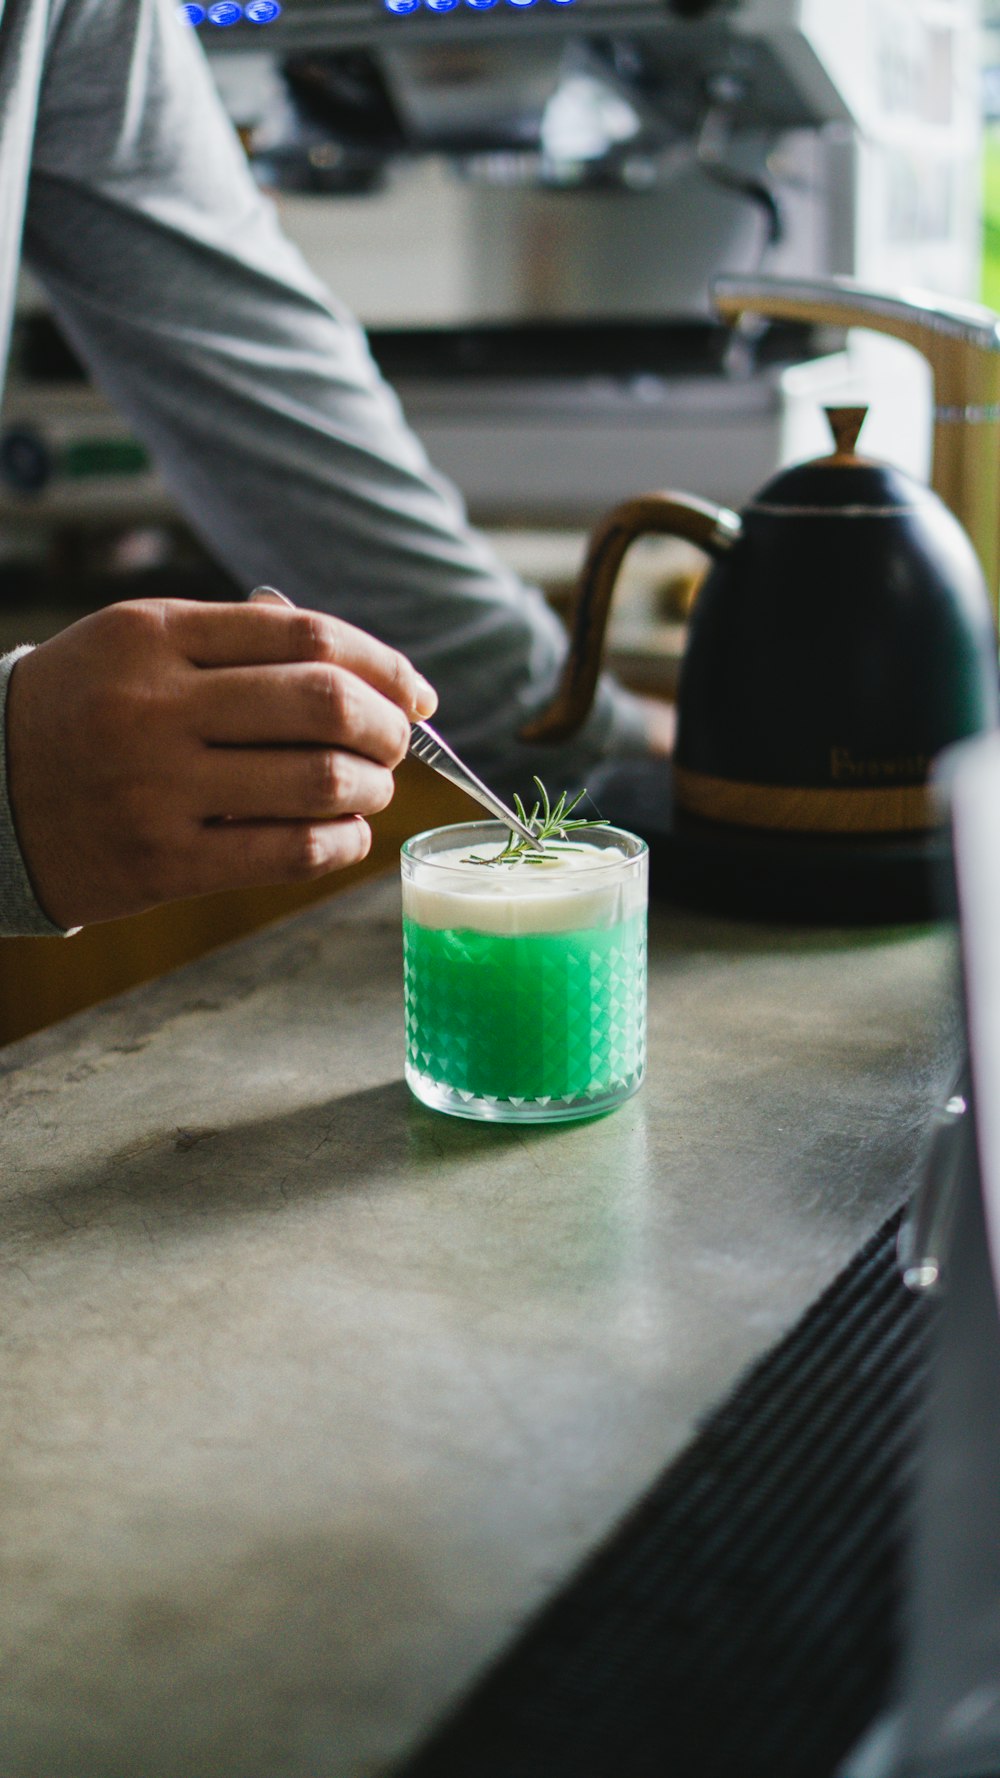 a person holding a green cup with a green substance in it